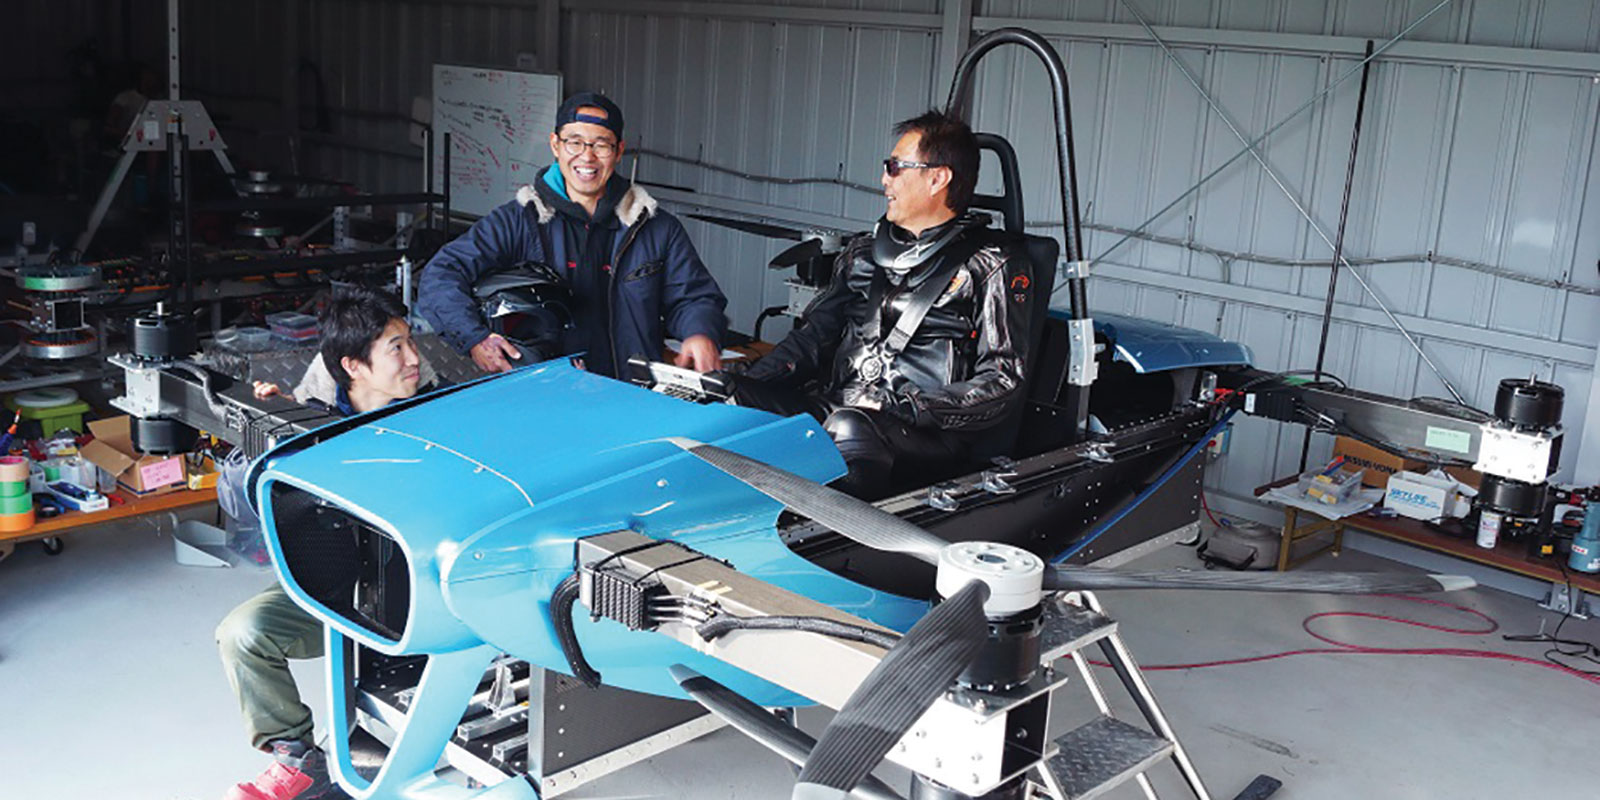 SkyDrive’s SD-02 completed the first manned flight of a car in Japan in December 2019 | ©SkyDrive